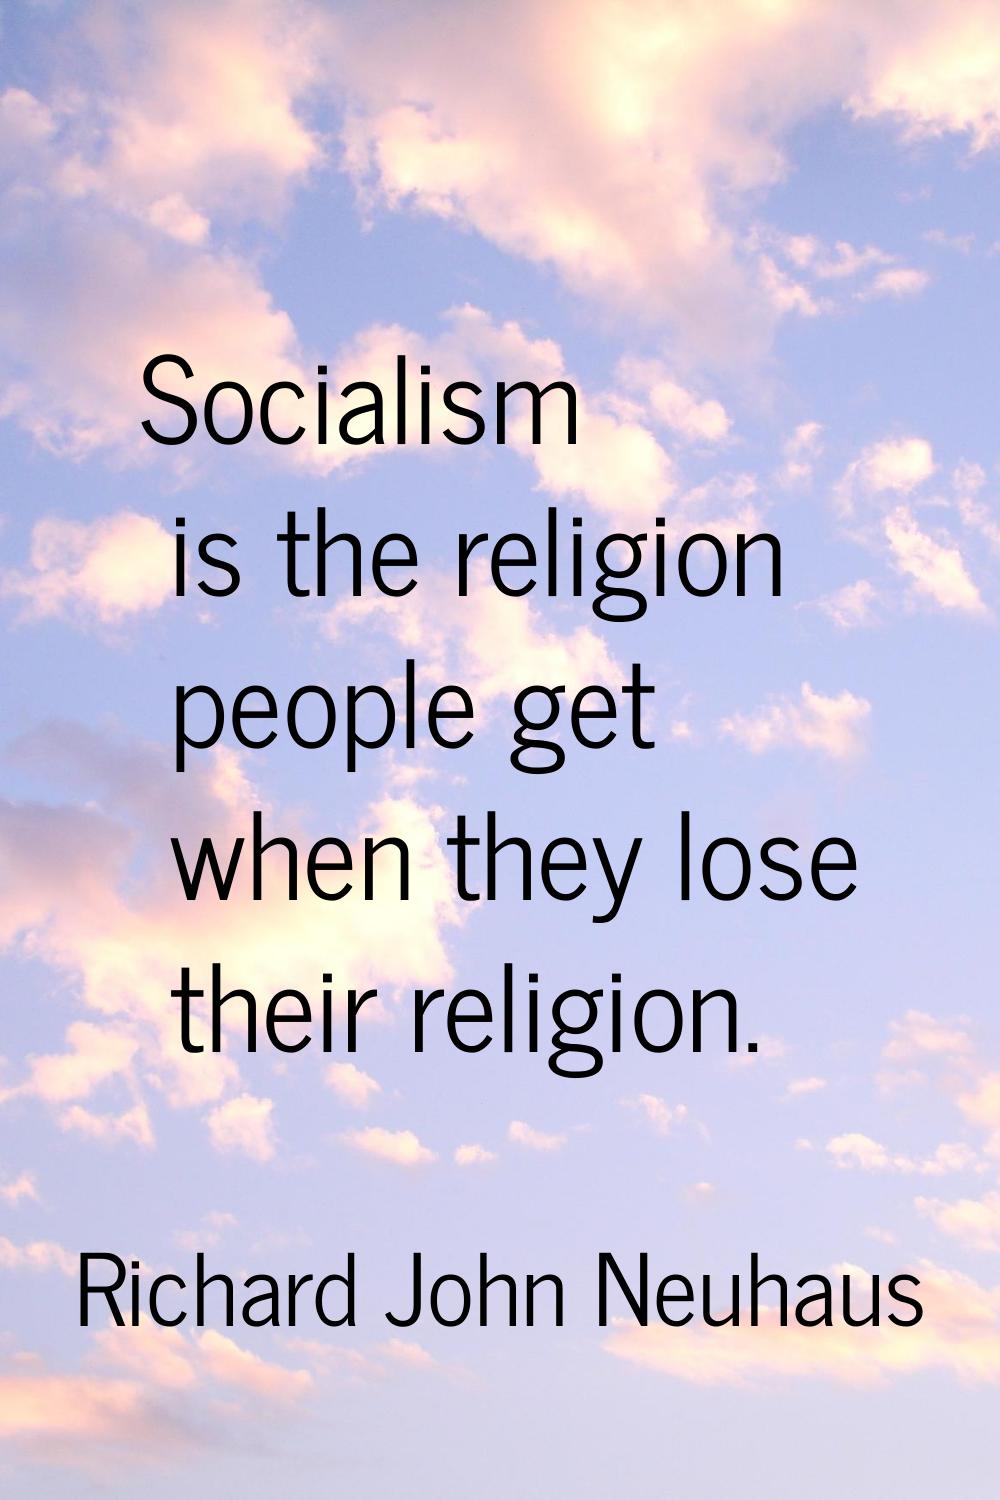 Socialism is the religion people get when they lose their religion.